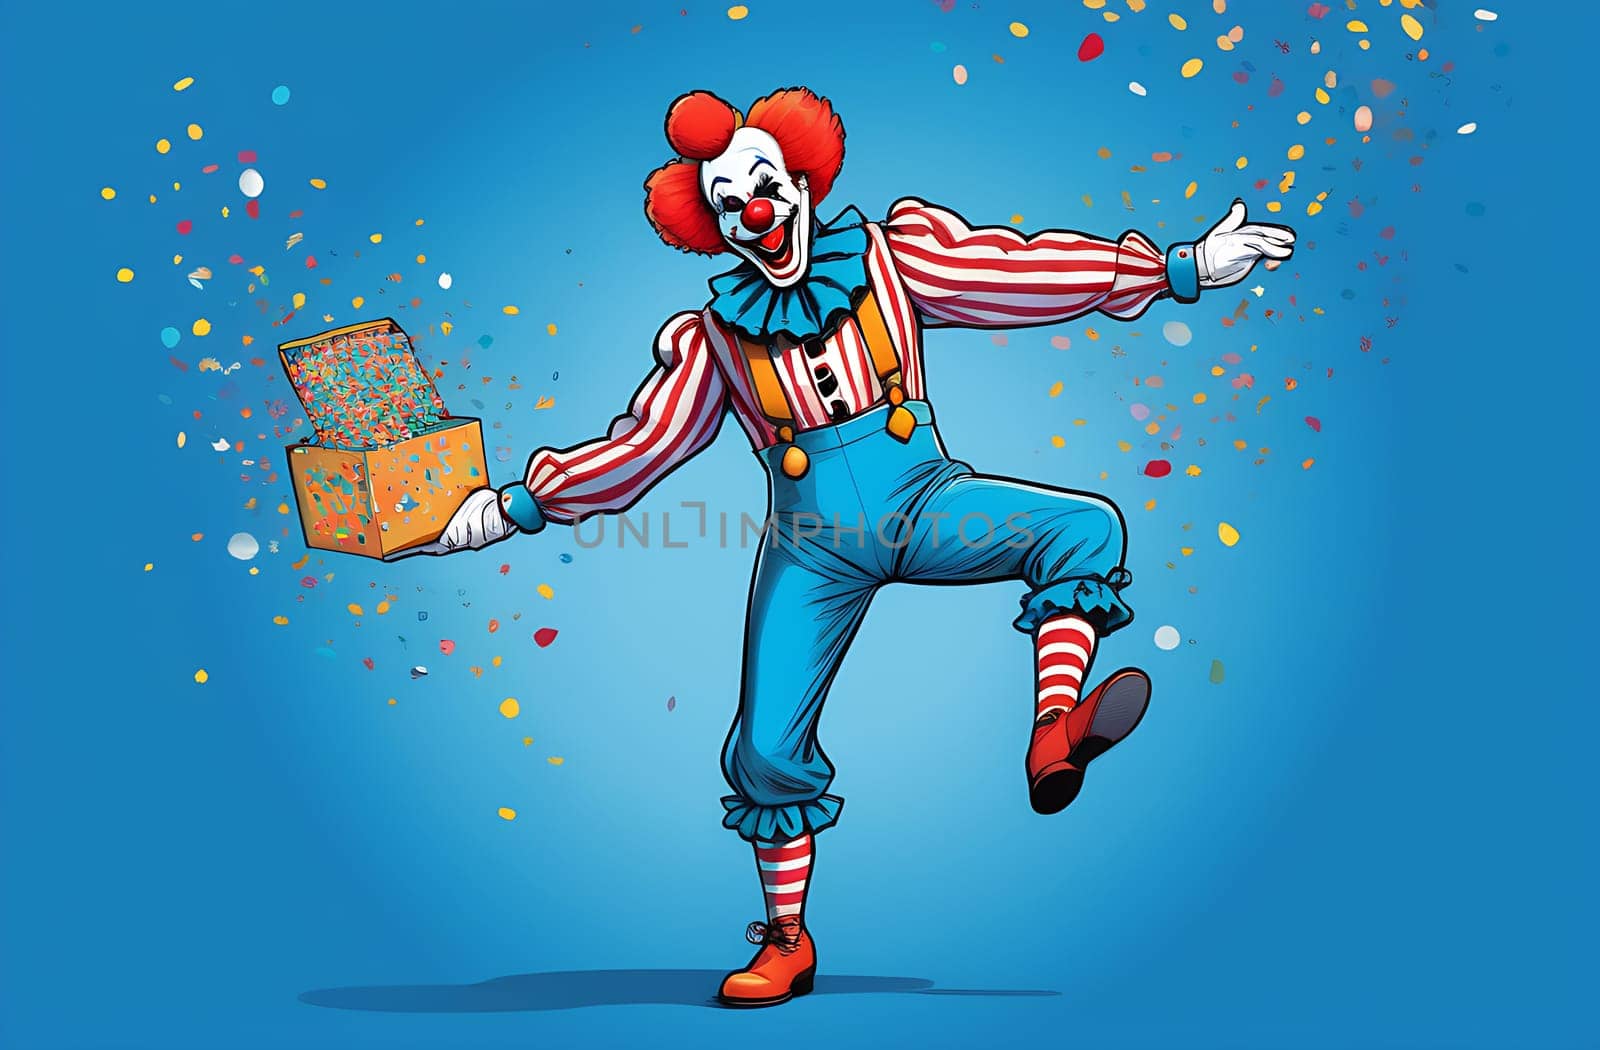 A cheerful clown on a blue background stands on one leg, with confetti scattered around. April Fool's Day Concept by claire_lucia